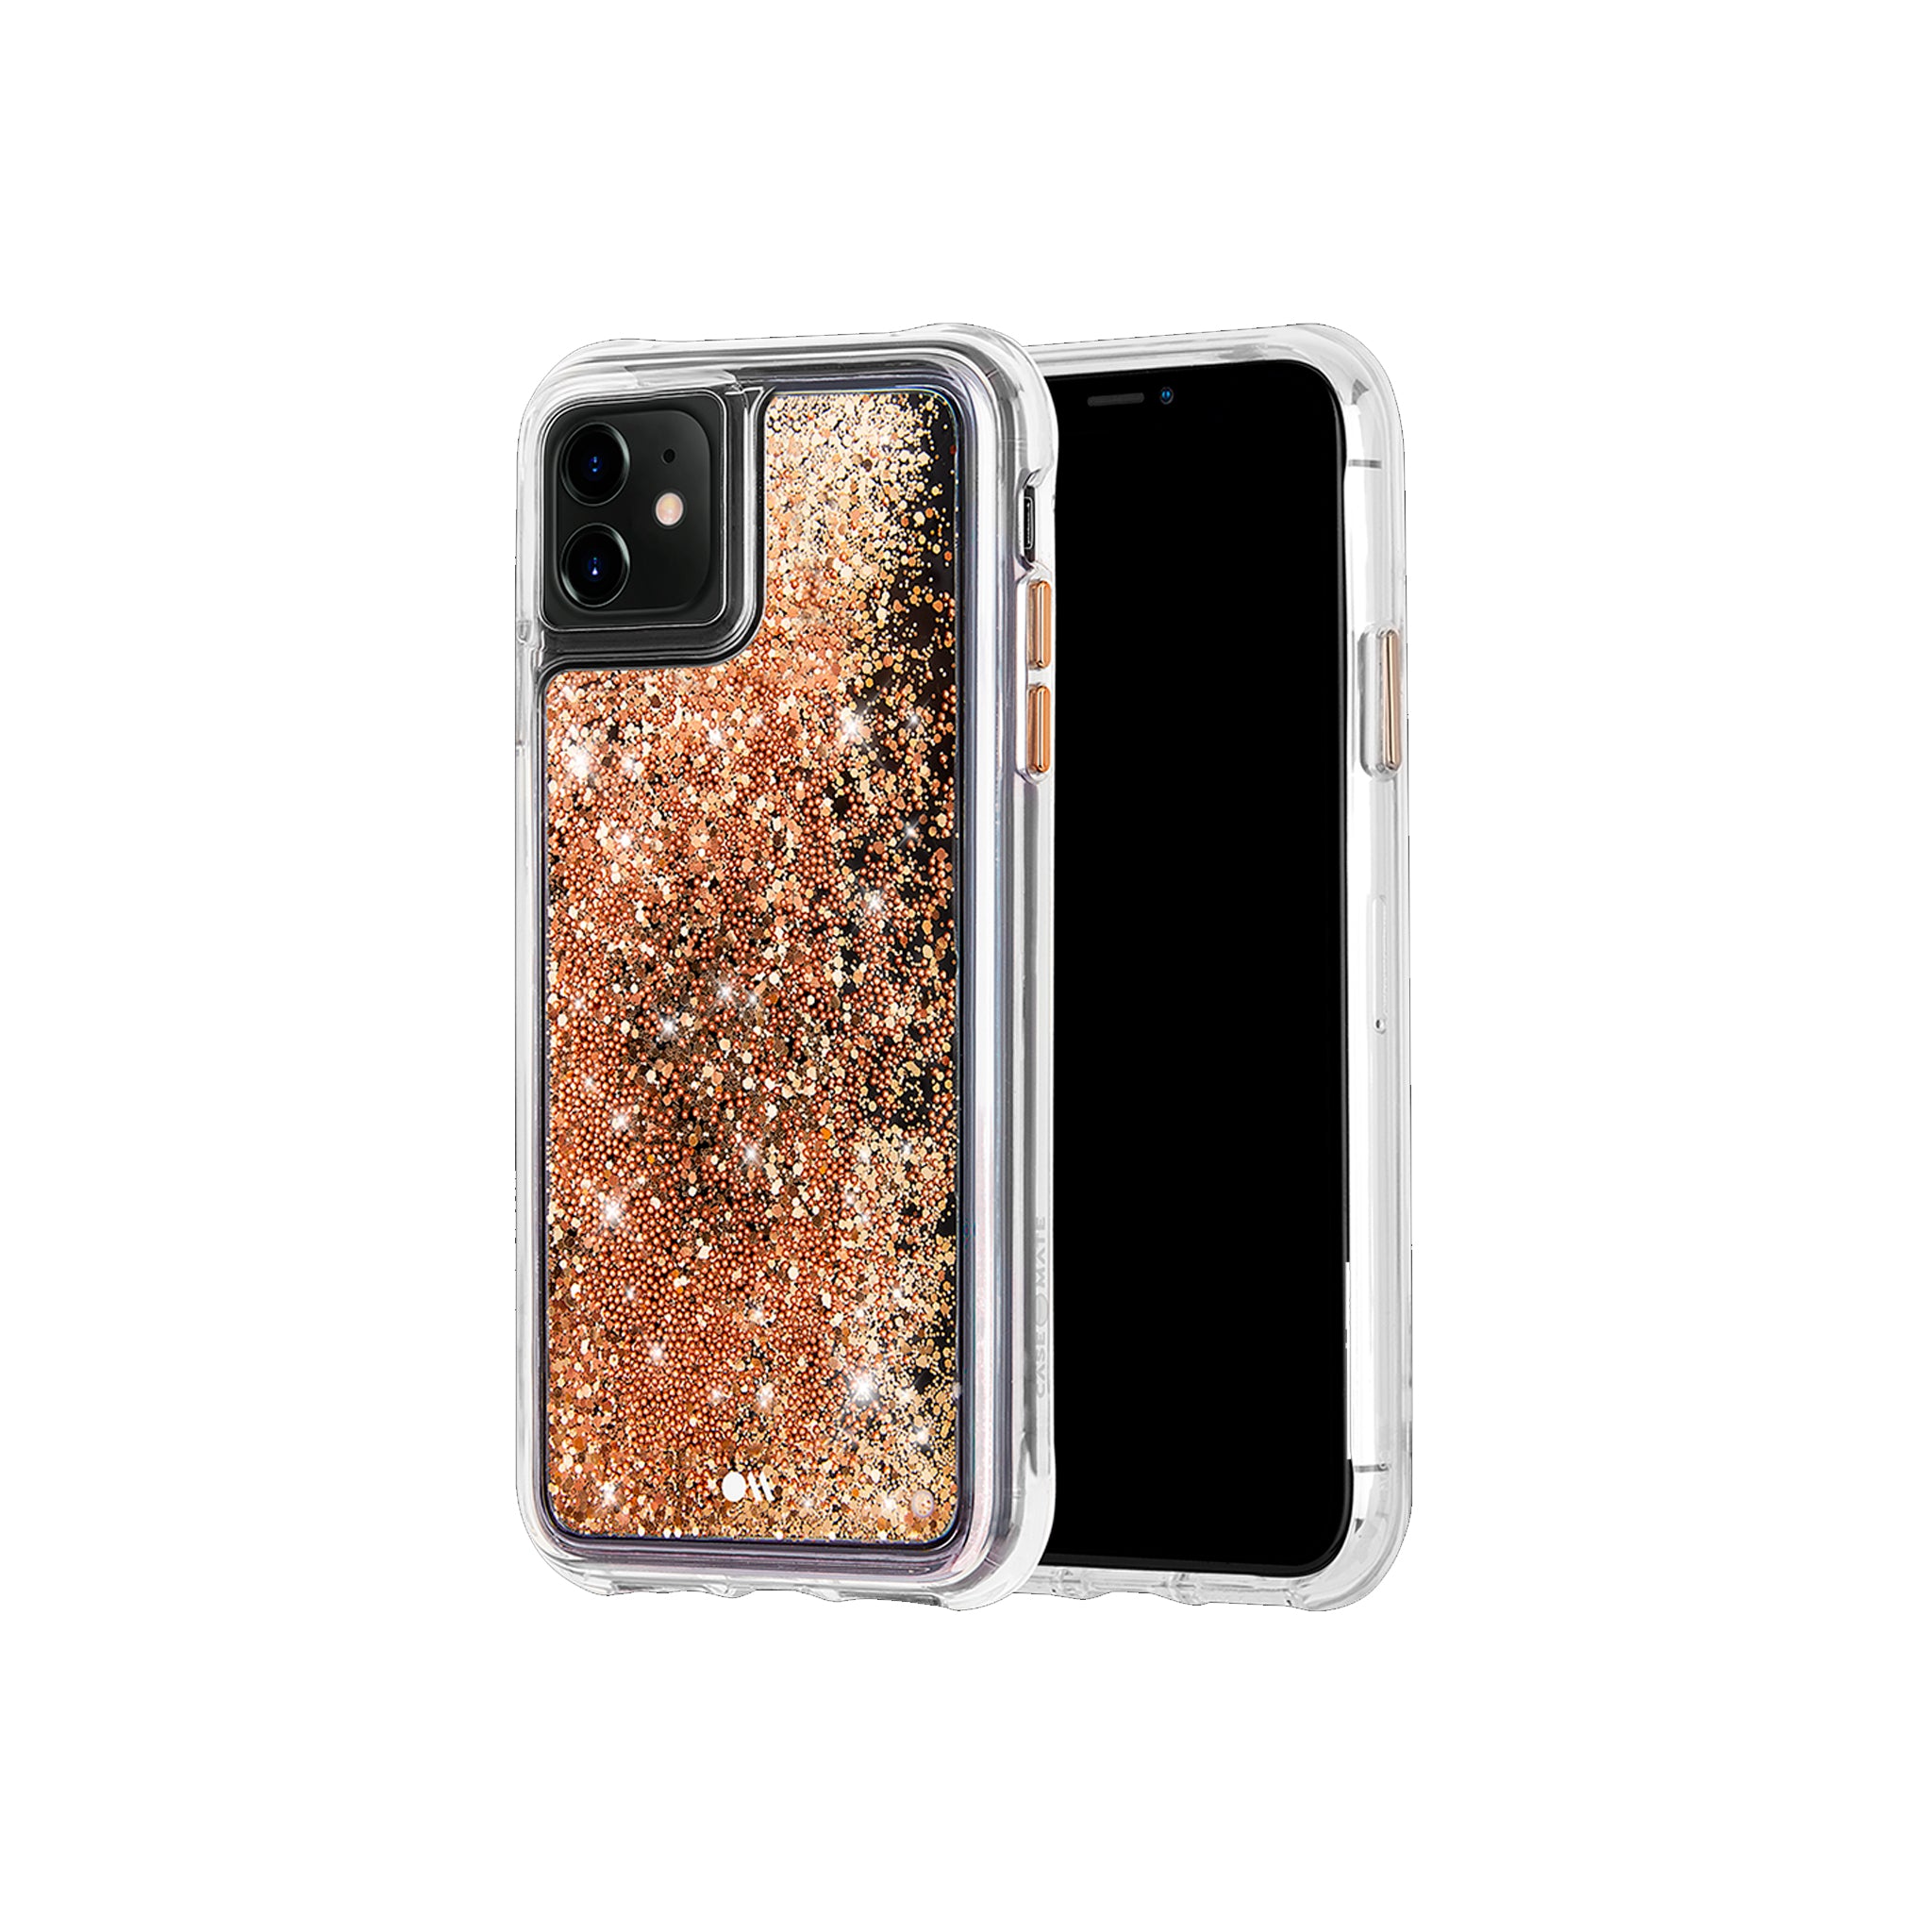 Case-mate - Waterfall Case For Apple iPhone 11 - Gold